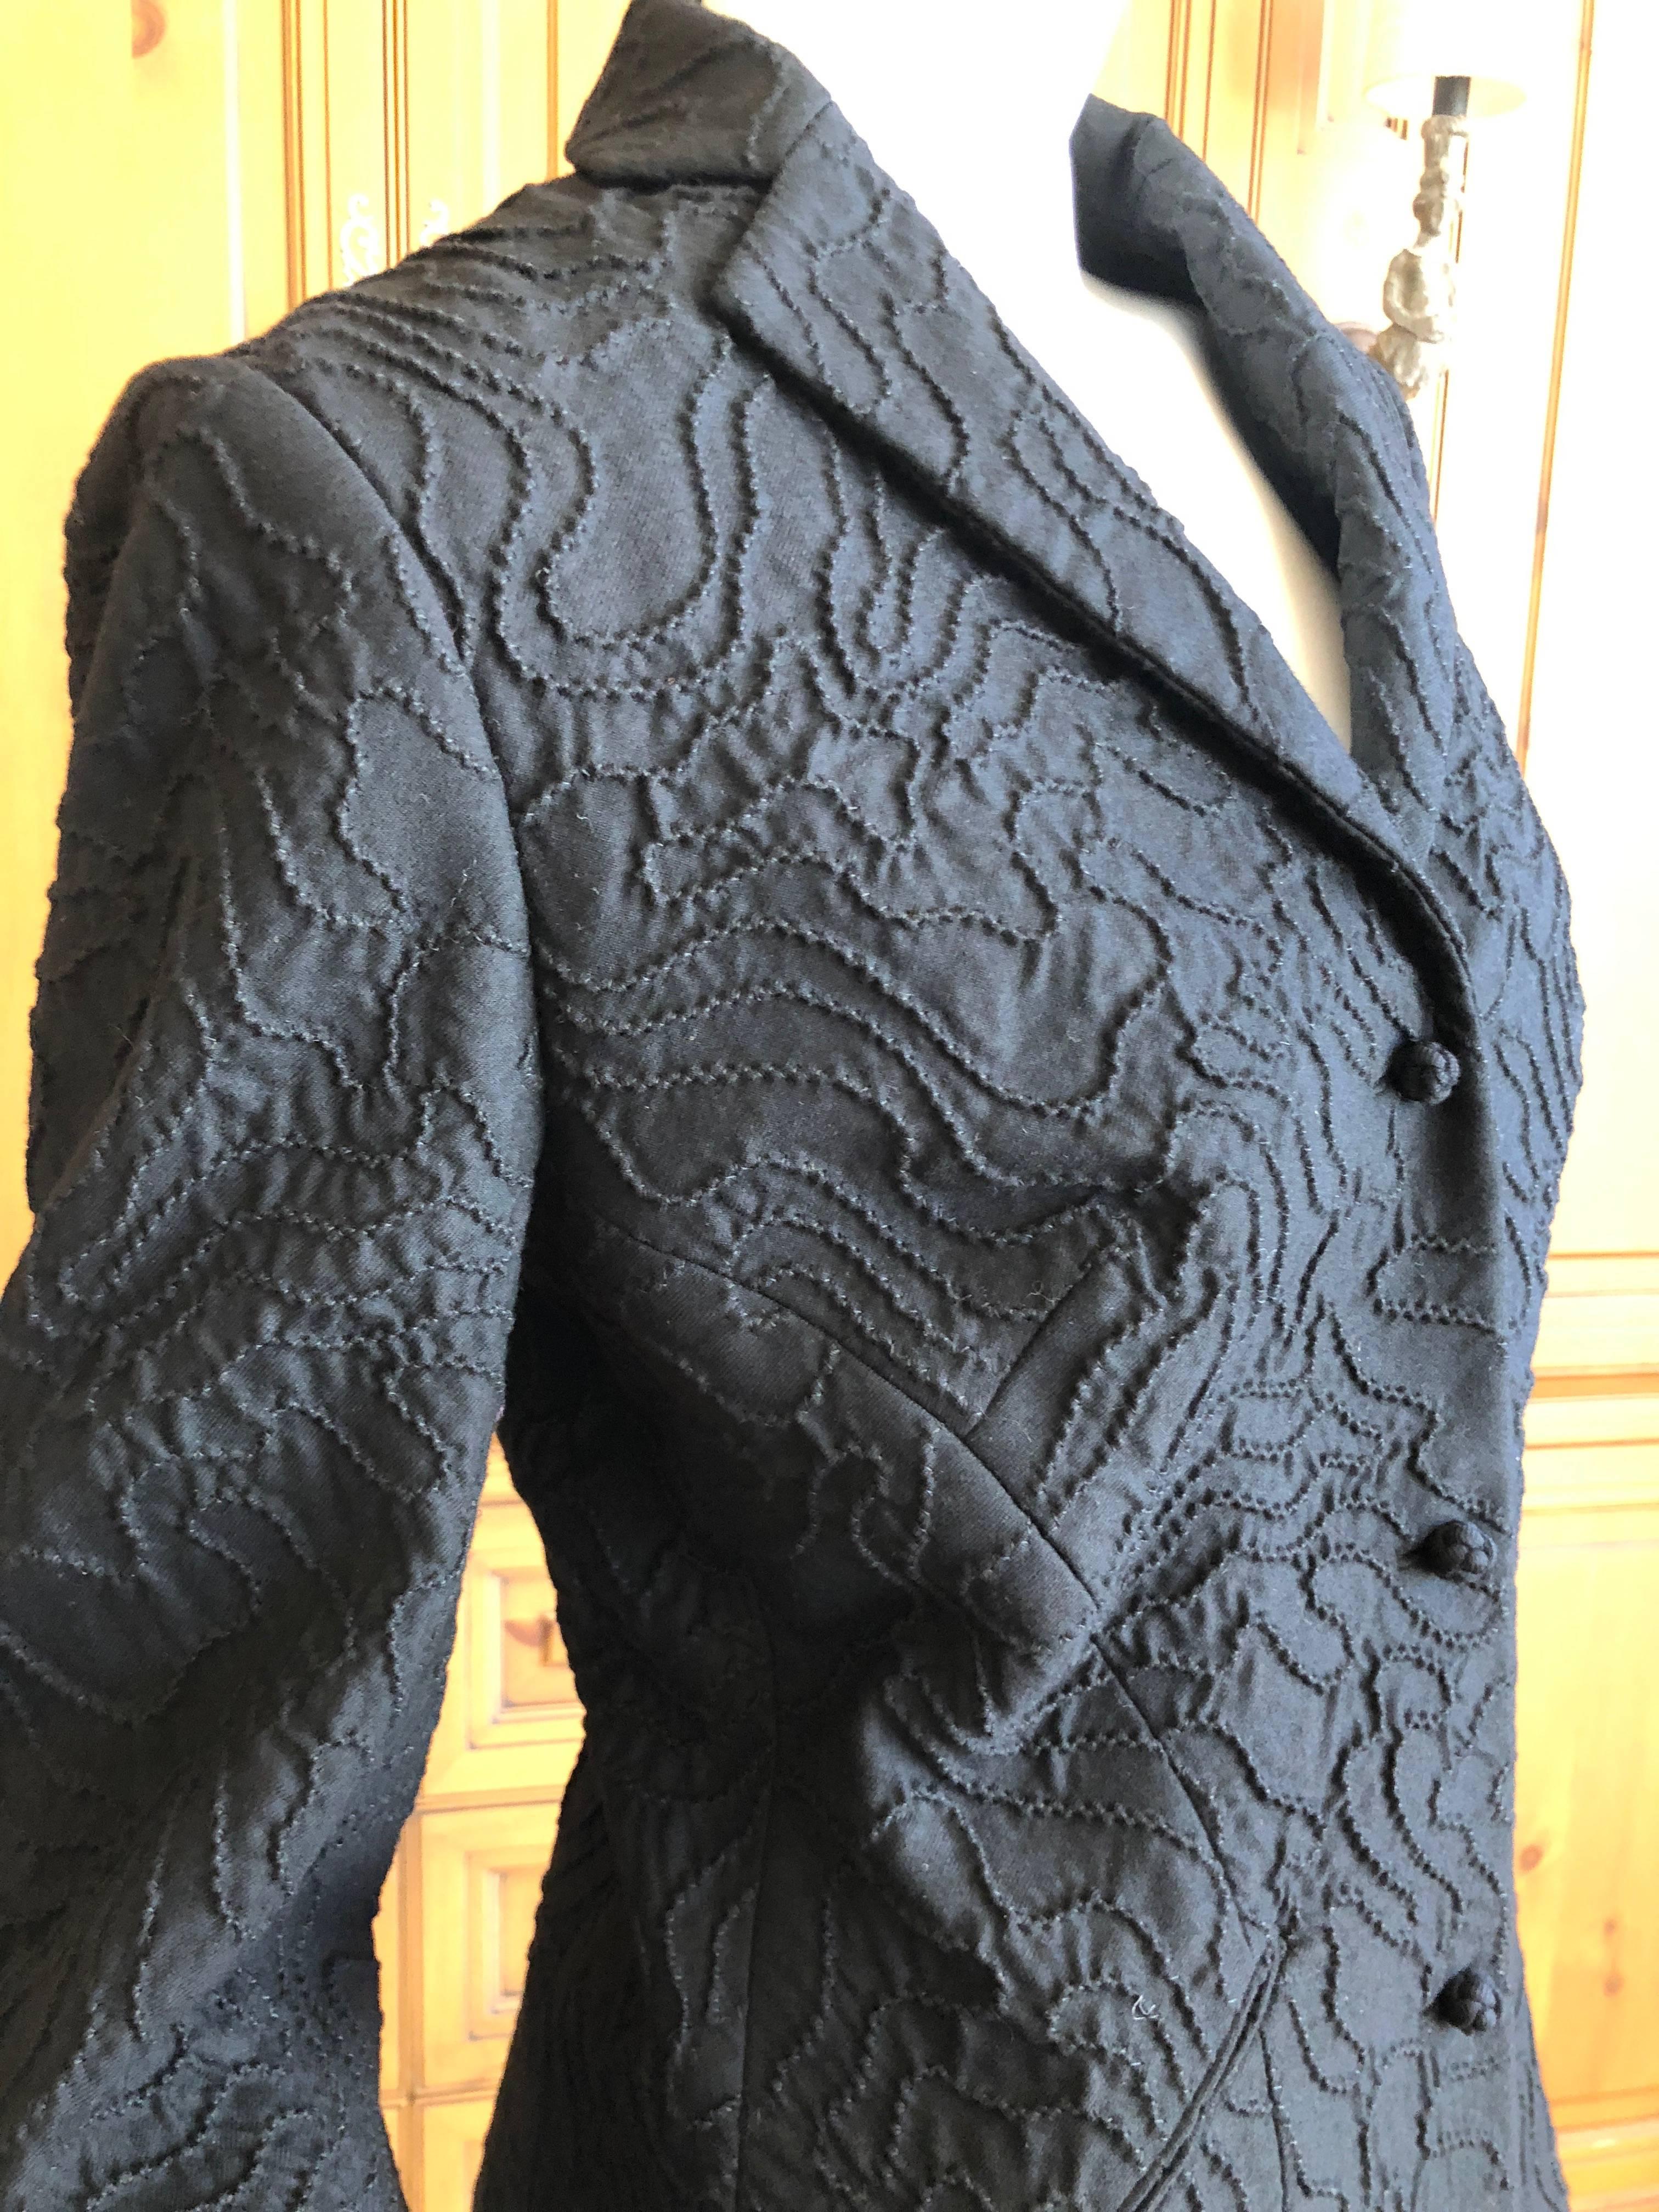 Chado Ralph Rucci Exquisite Pure Cashmere Black Embellished Jacket.
This is so pretty, the workmanship is amazing.
Size 6 
Bust 38" 
Waist 32"
Length 30"
 Excellent condition